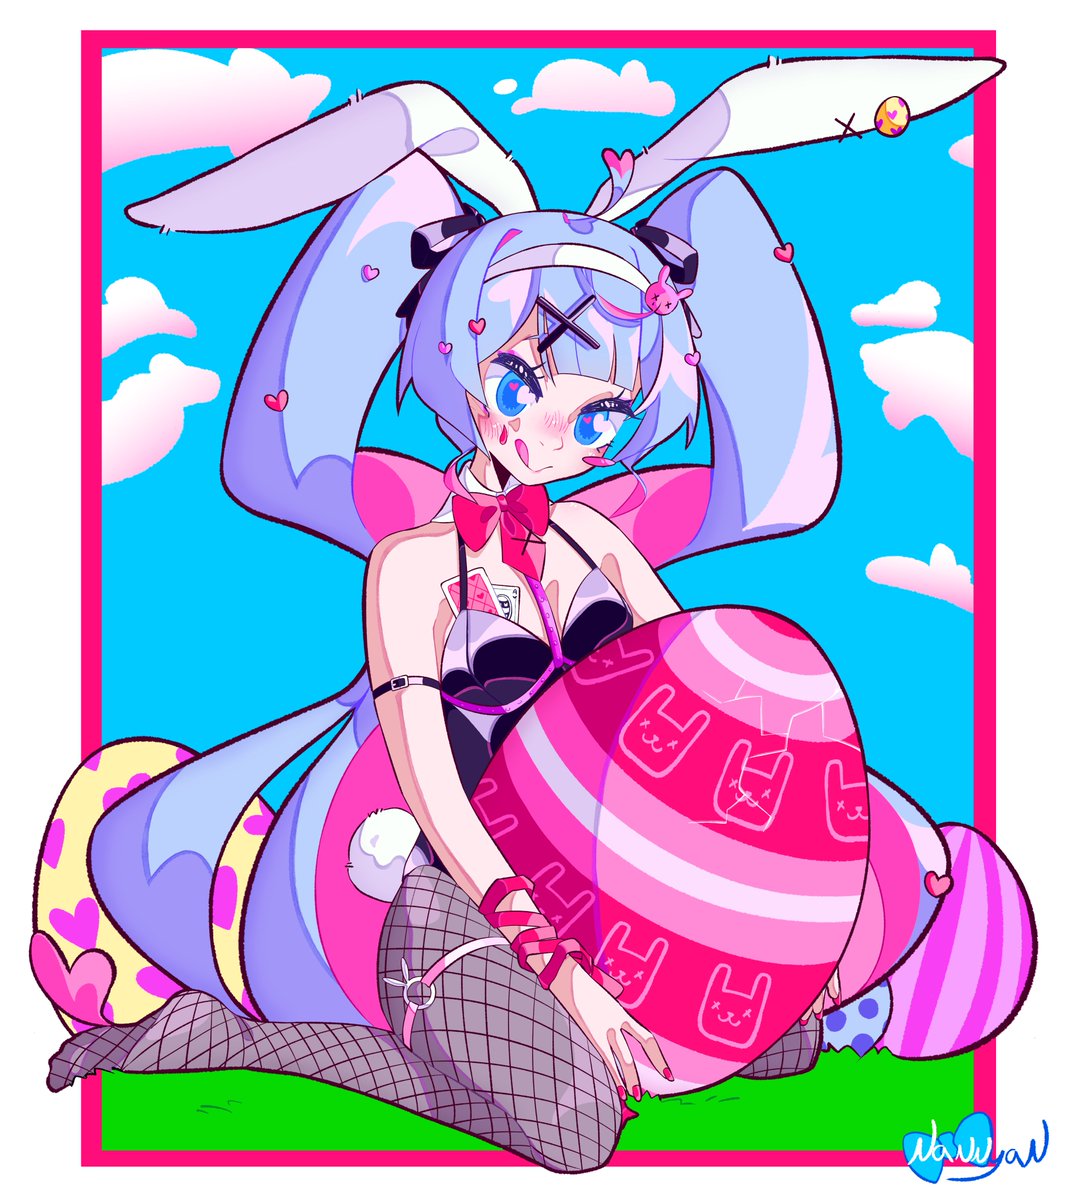 🌸🥚Easter🐰🌻💗
#VOCALOID #Miku #初音ミク #初音ミクイラスト #EasterBunny